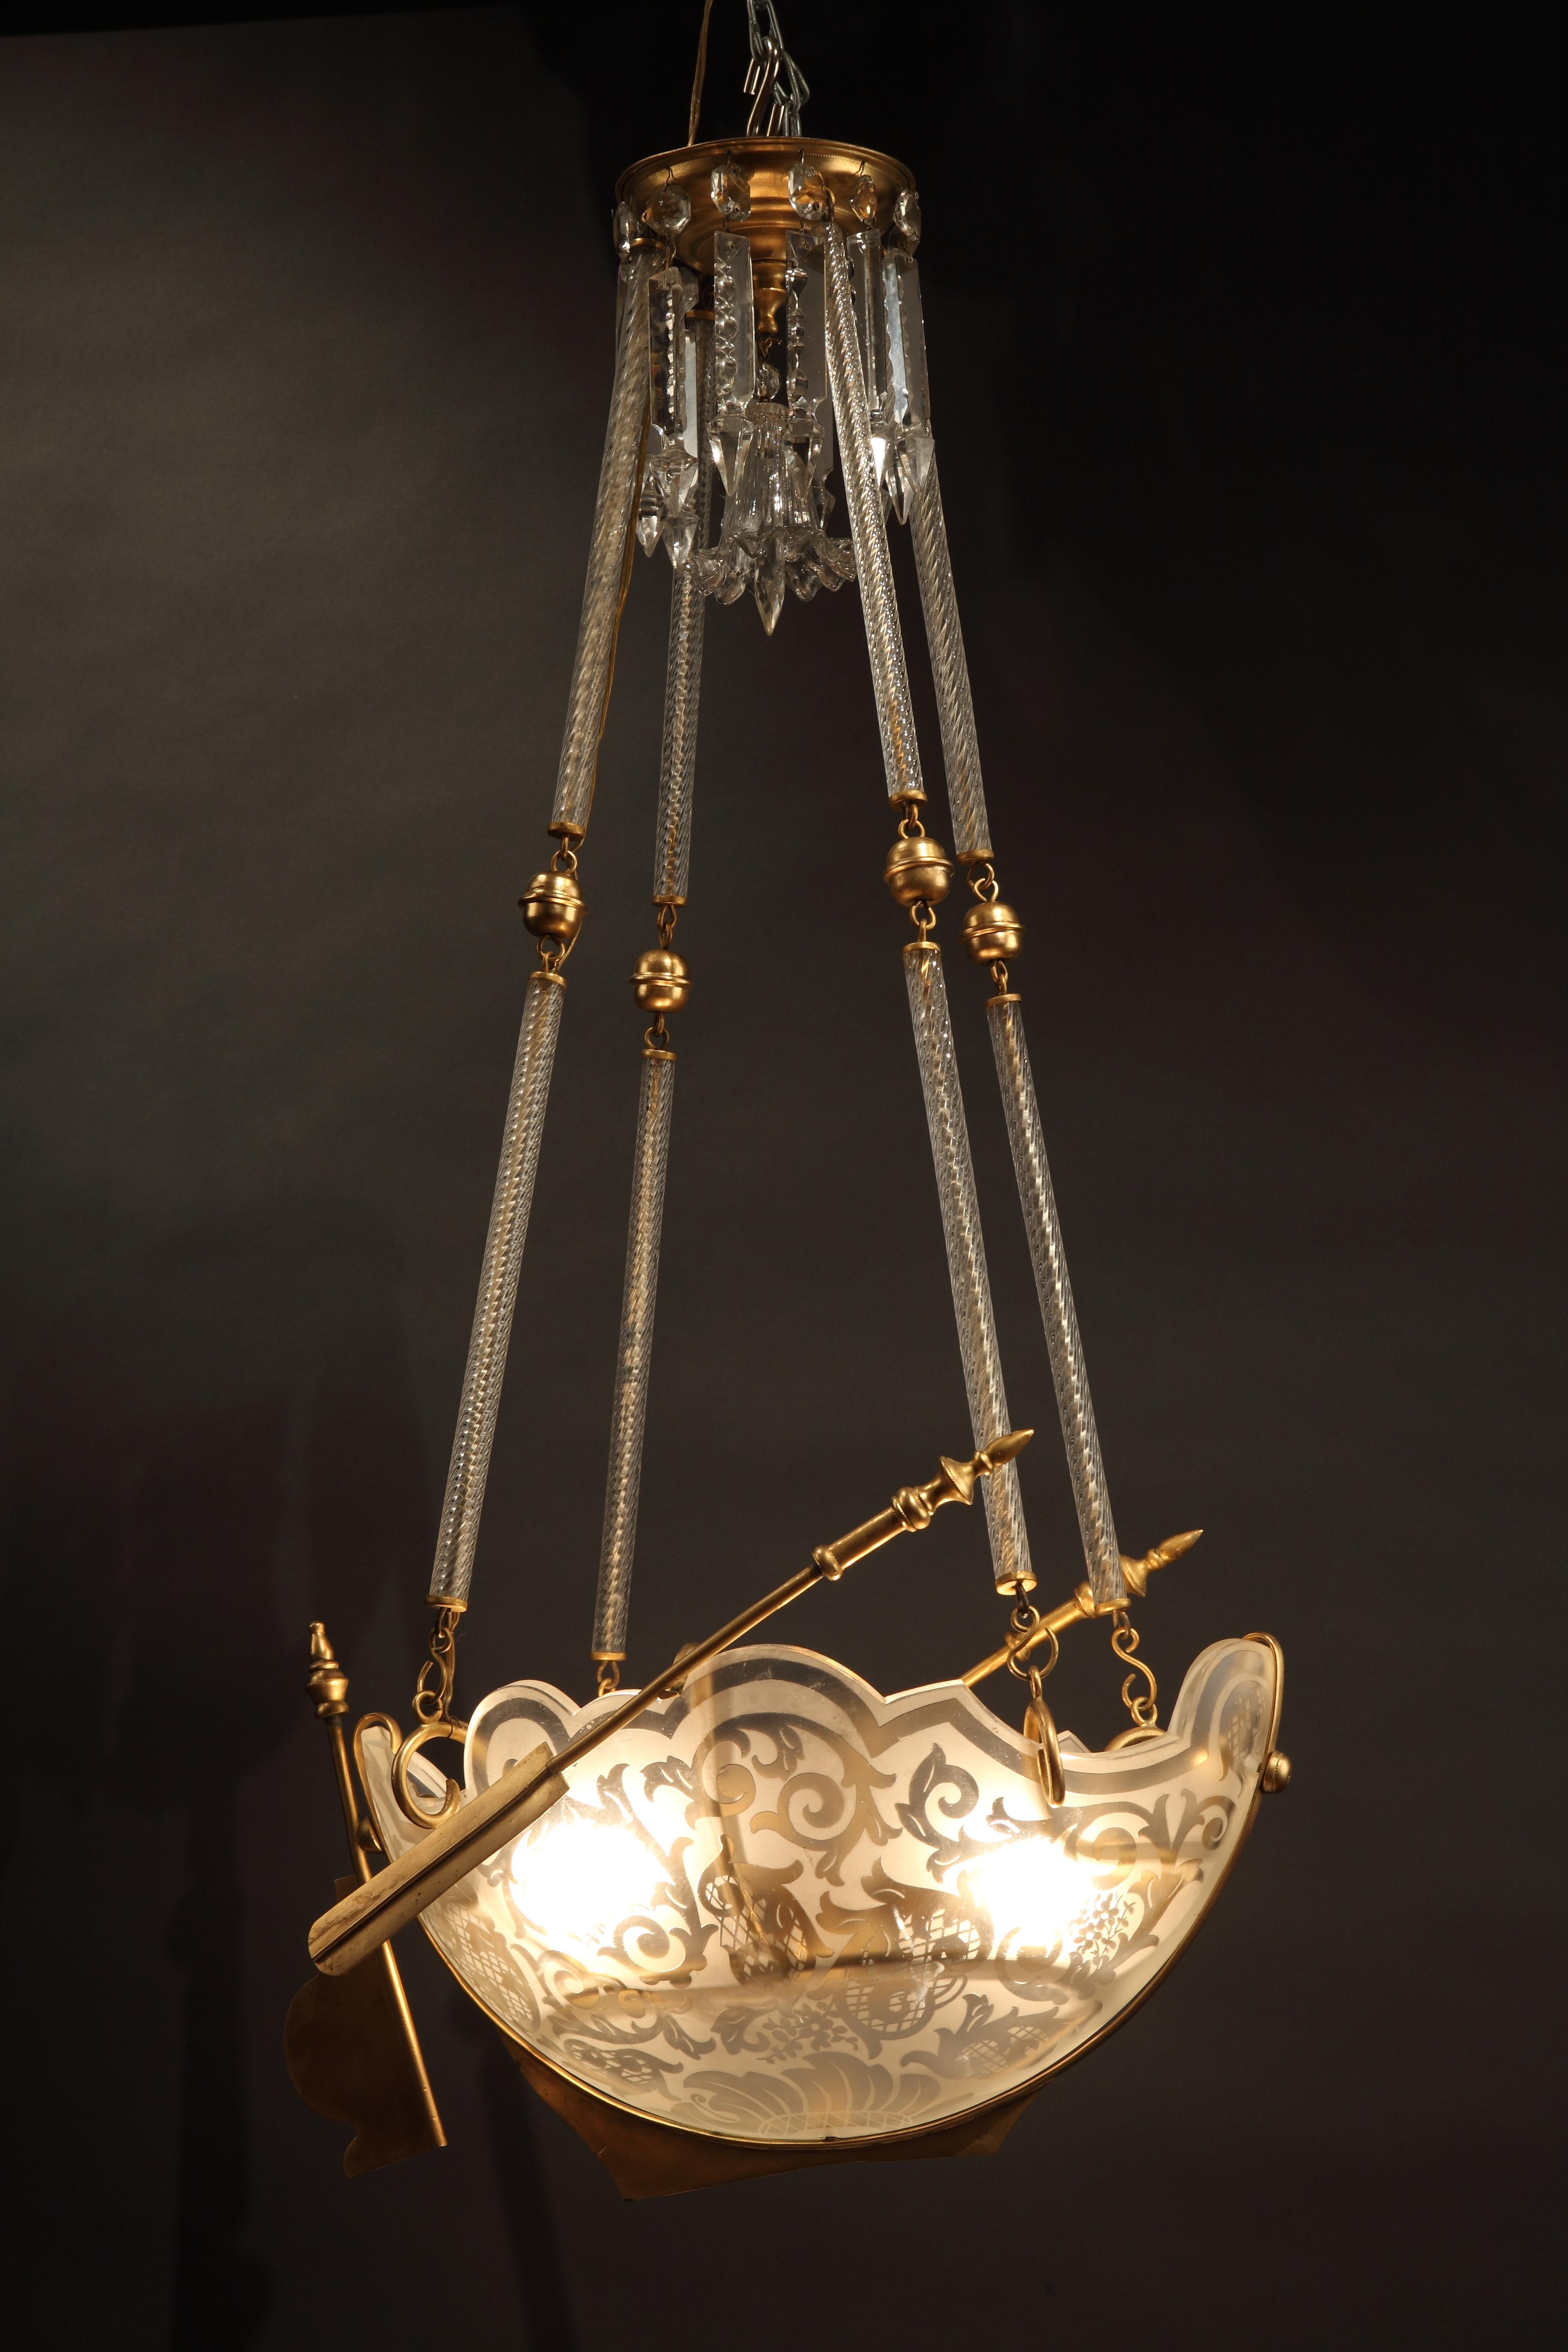 Magnificent vessel shaped chandelier in gilded bronze and engraved crystal attributed to Baccarat, suspended by four articulated chains. A ceiling pendant decorated with prisms and a central chiseled crystal bell tops up the chandelier.

The